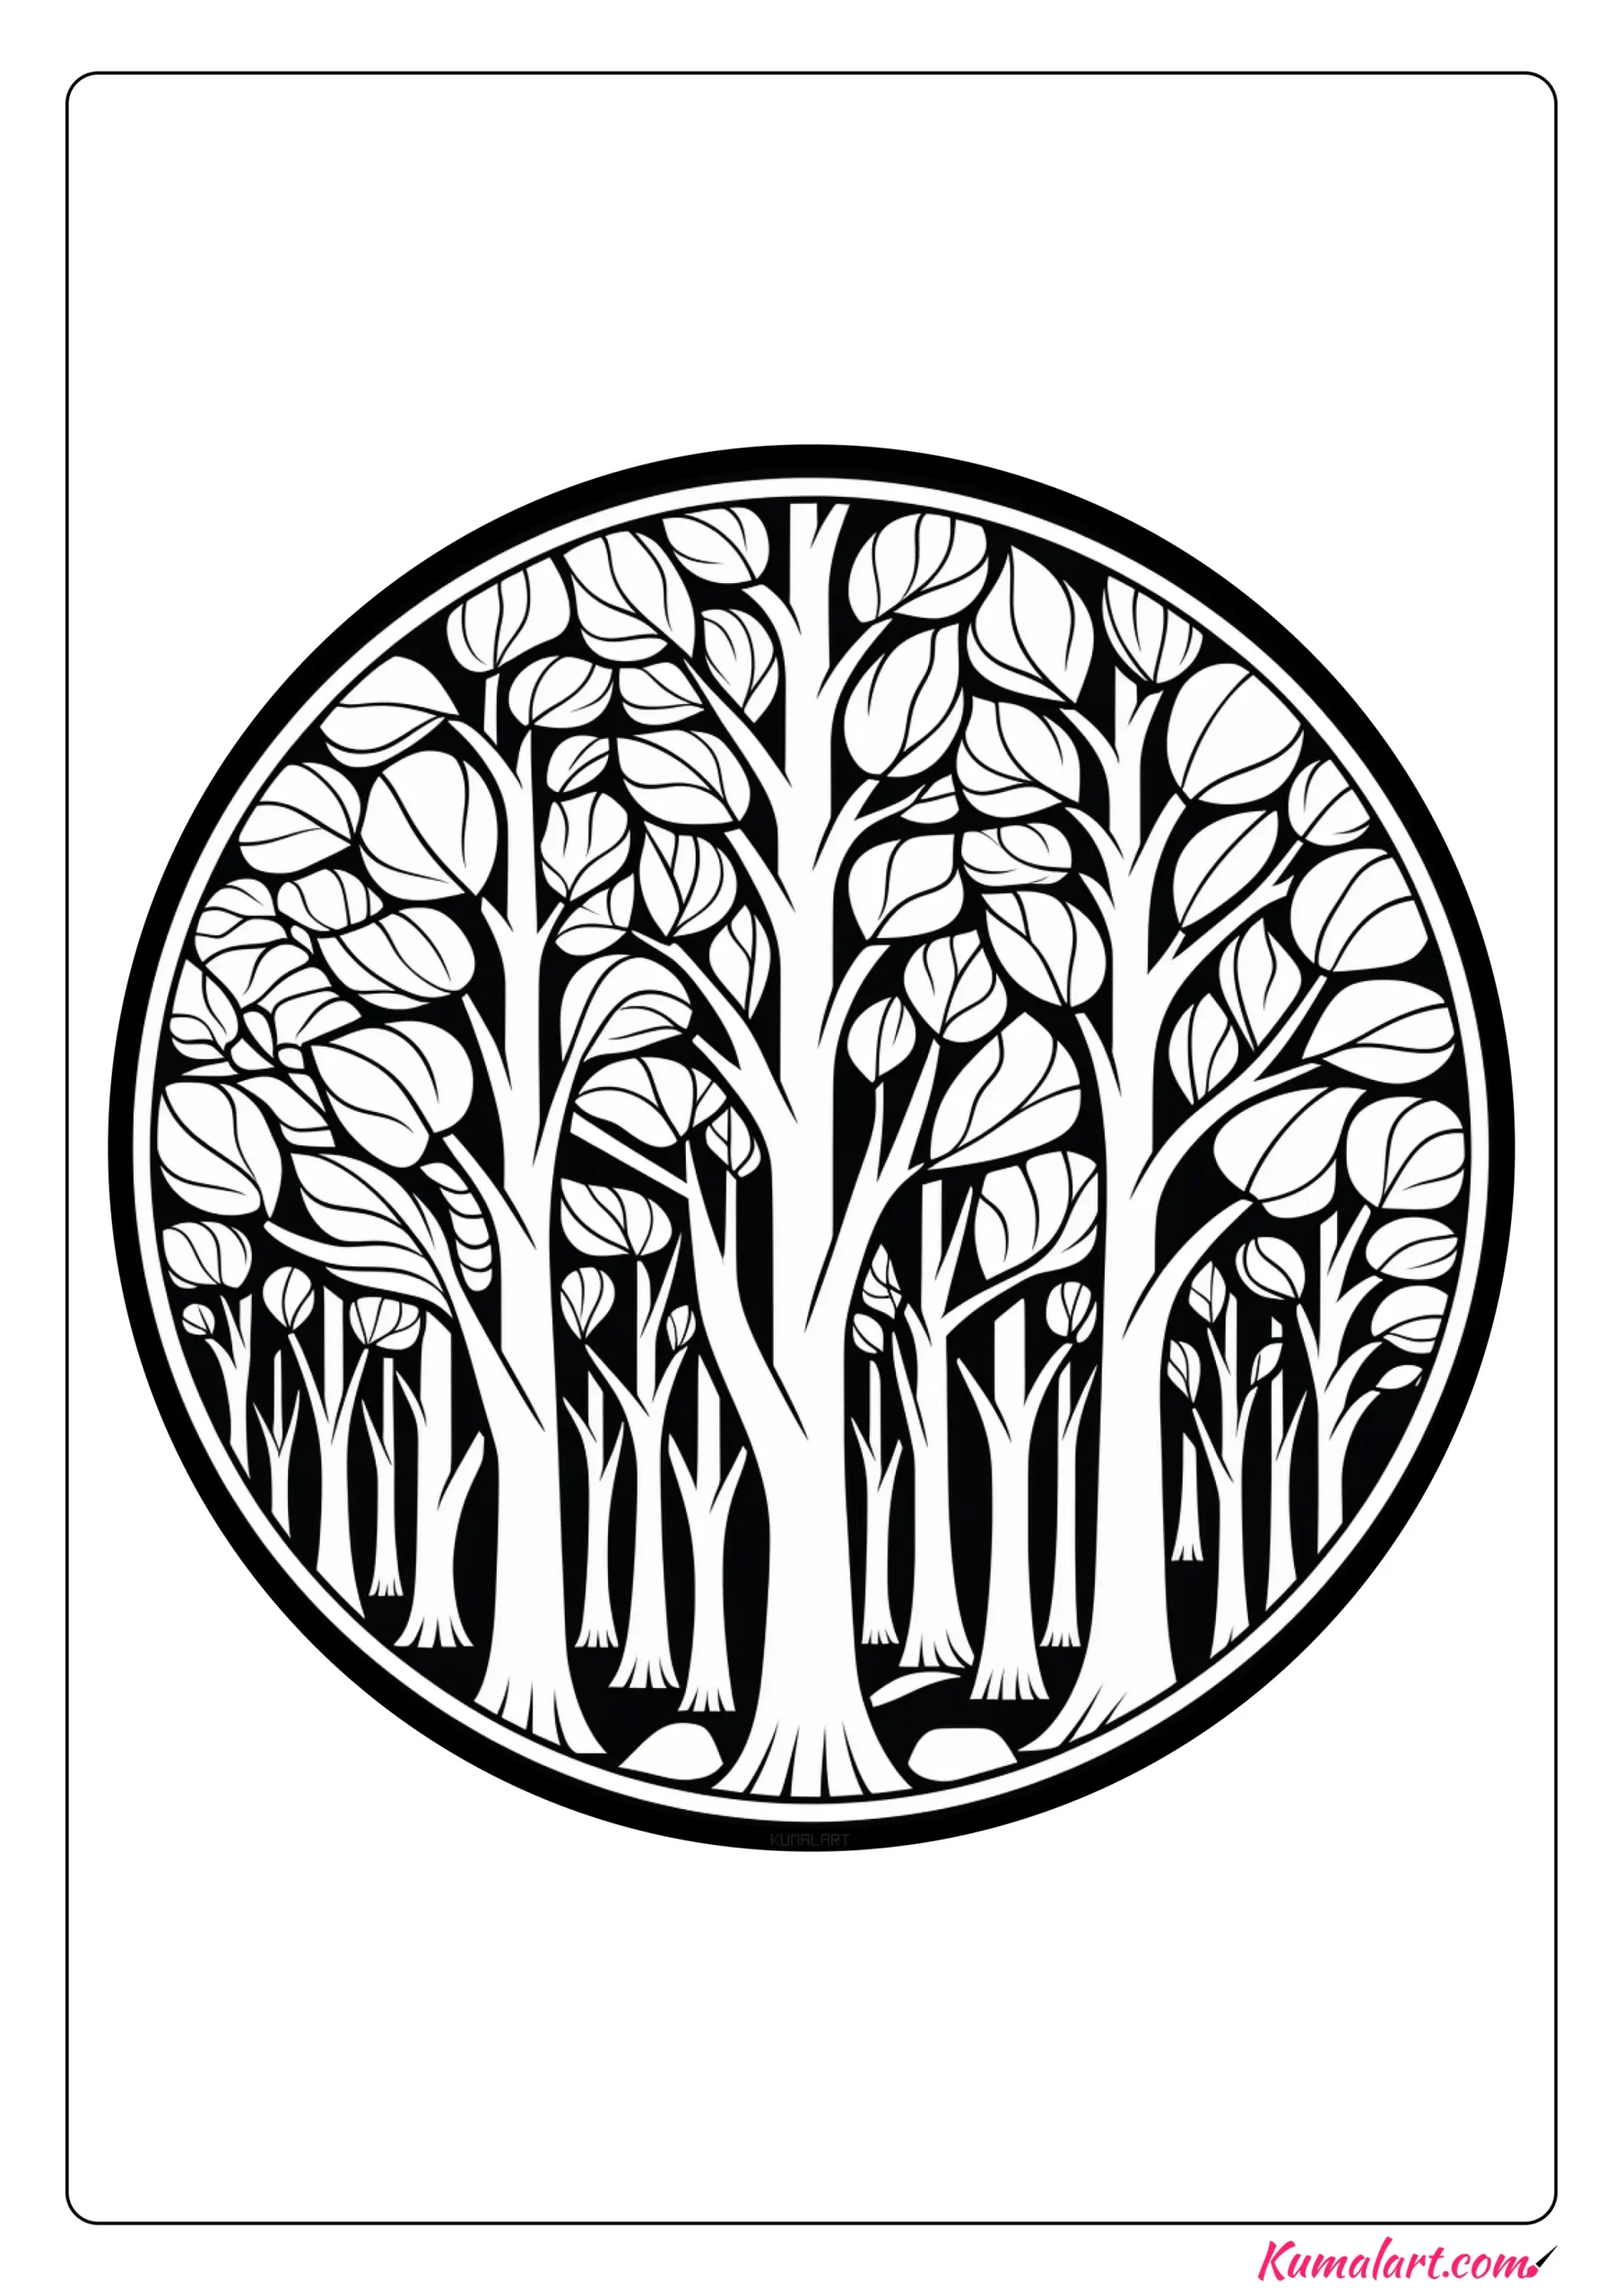 Diverse Forest Coloring Page